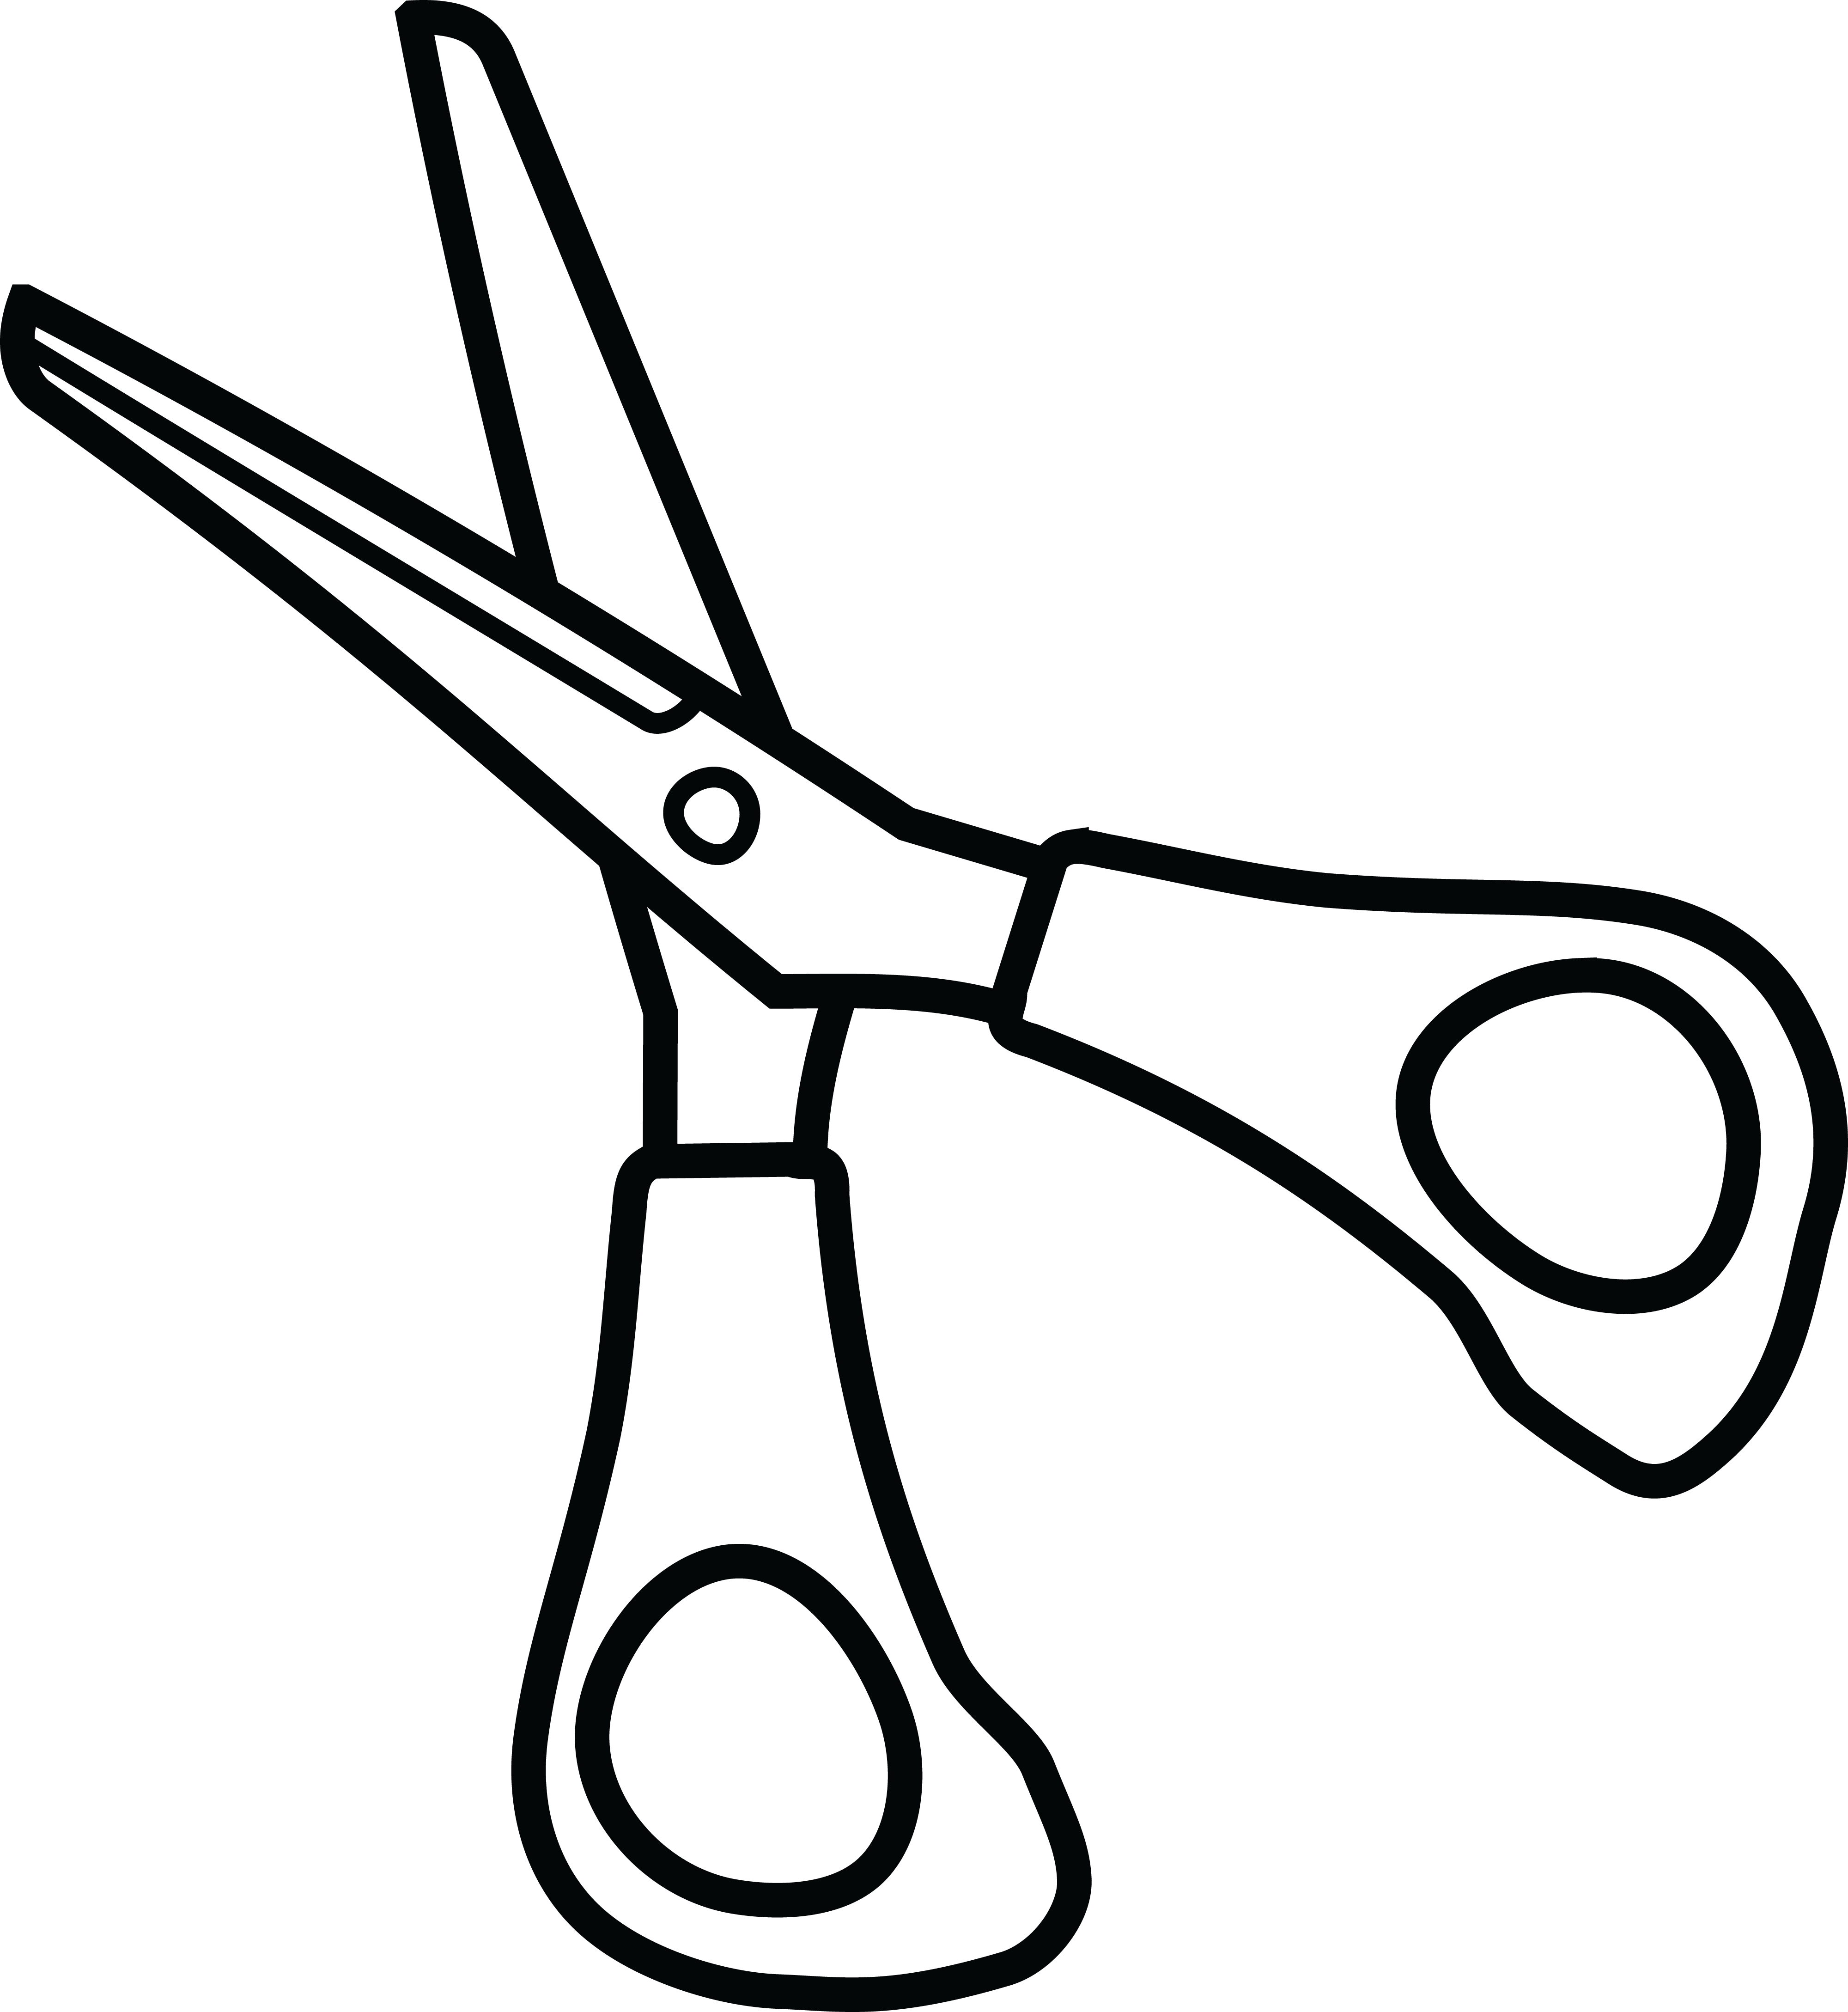 Hairdresser clipart baber. Collection of free cessor